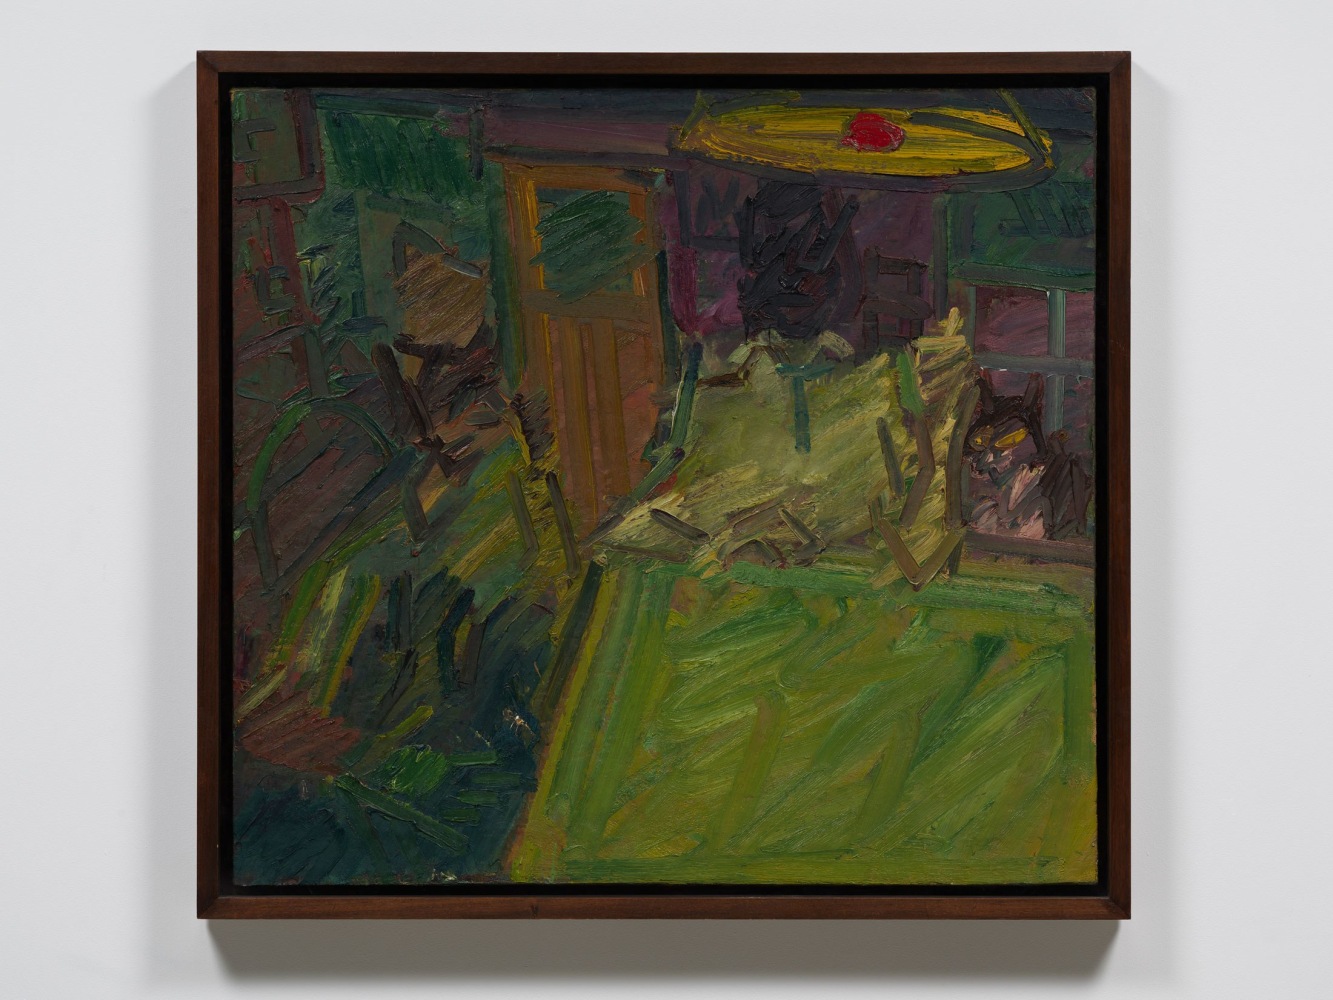 Frank Auerbach
Interior Vincent Terrace II, 1984
Oil on canvas
48 x 52 1/2 inches
(121.9 x 133.3 cm)

Private Collection